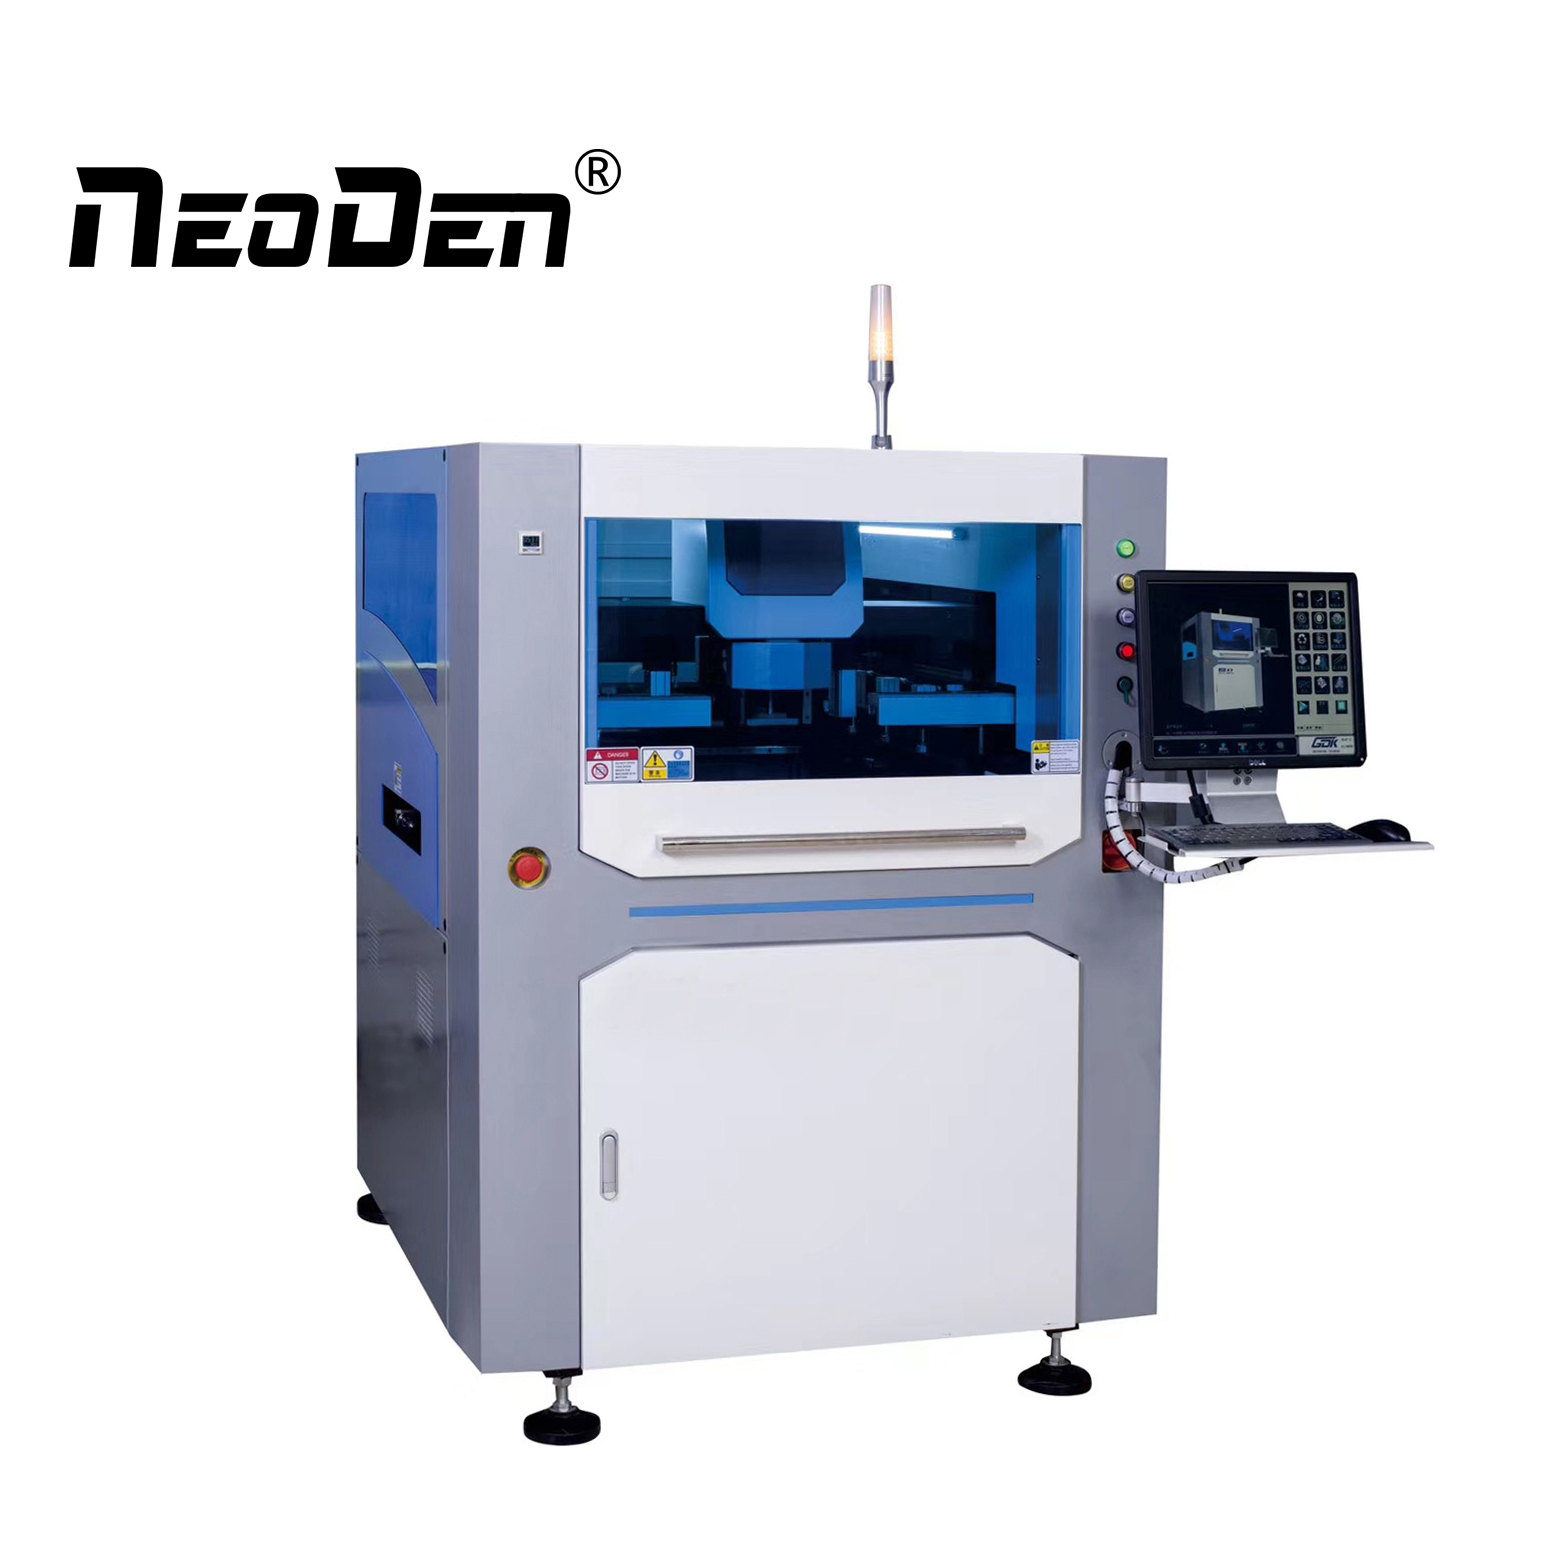 Steps for Solder Paste Printing Machine Working